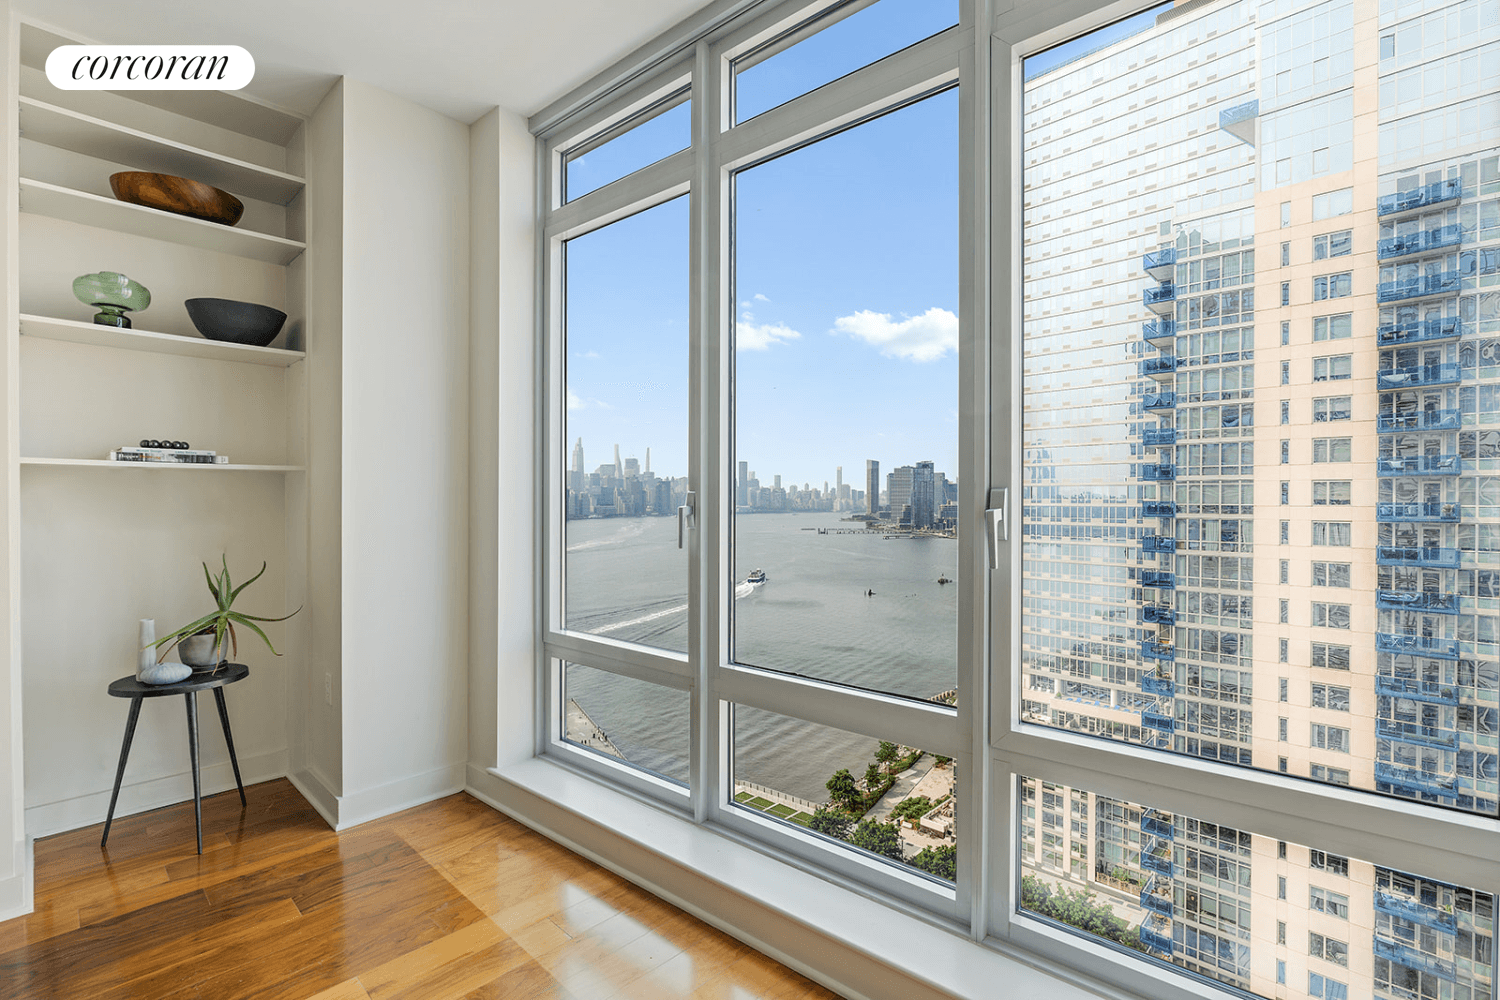 Welcome home to 1, 400 square feet of high floor waterfront luxury living with a view of the East River and Midtown skyline.